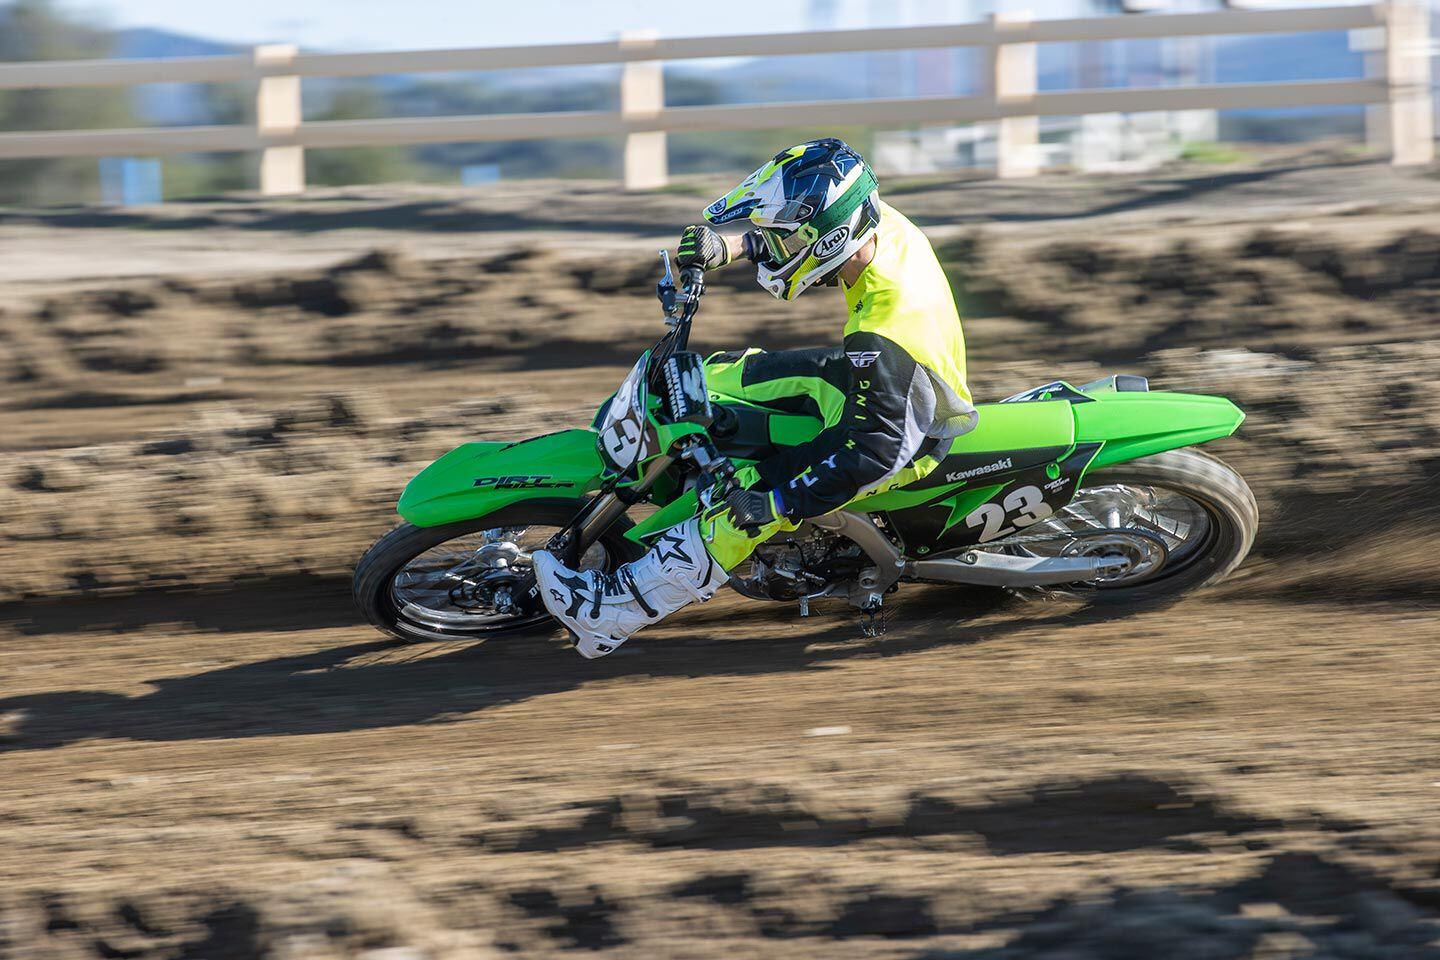 “The KX250’s ergonomics and stiff suspension worked well for me, but I’m sure most 250F riders would appreciate softer settings.” <i>—Casey Casper</i>